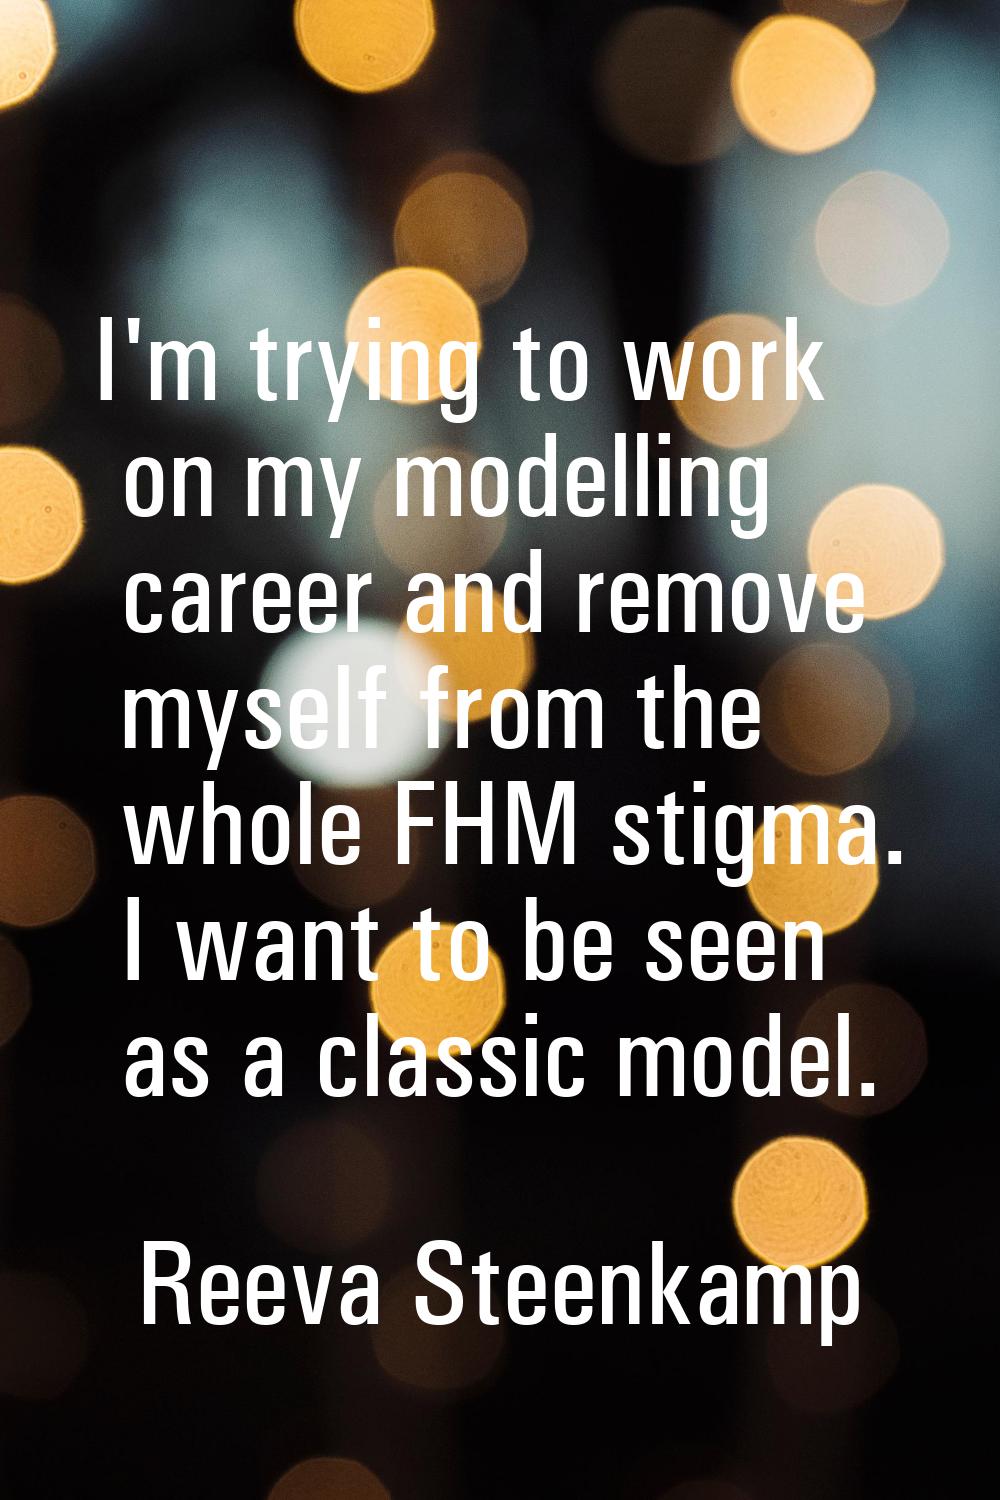 I'm trying to work on my modelling career and remove myself from the whole FHM stigma. I want to be